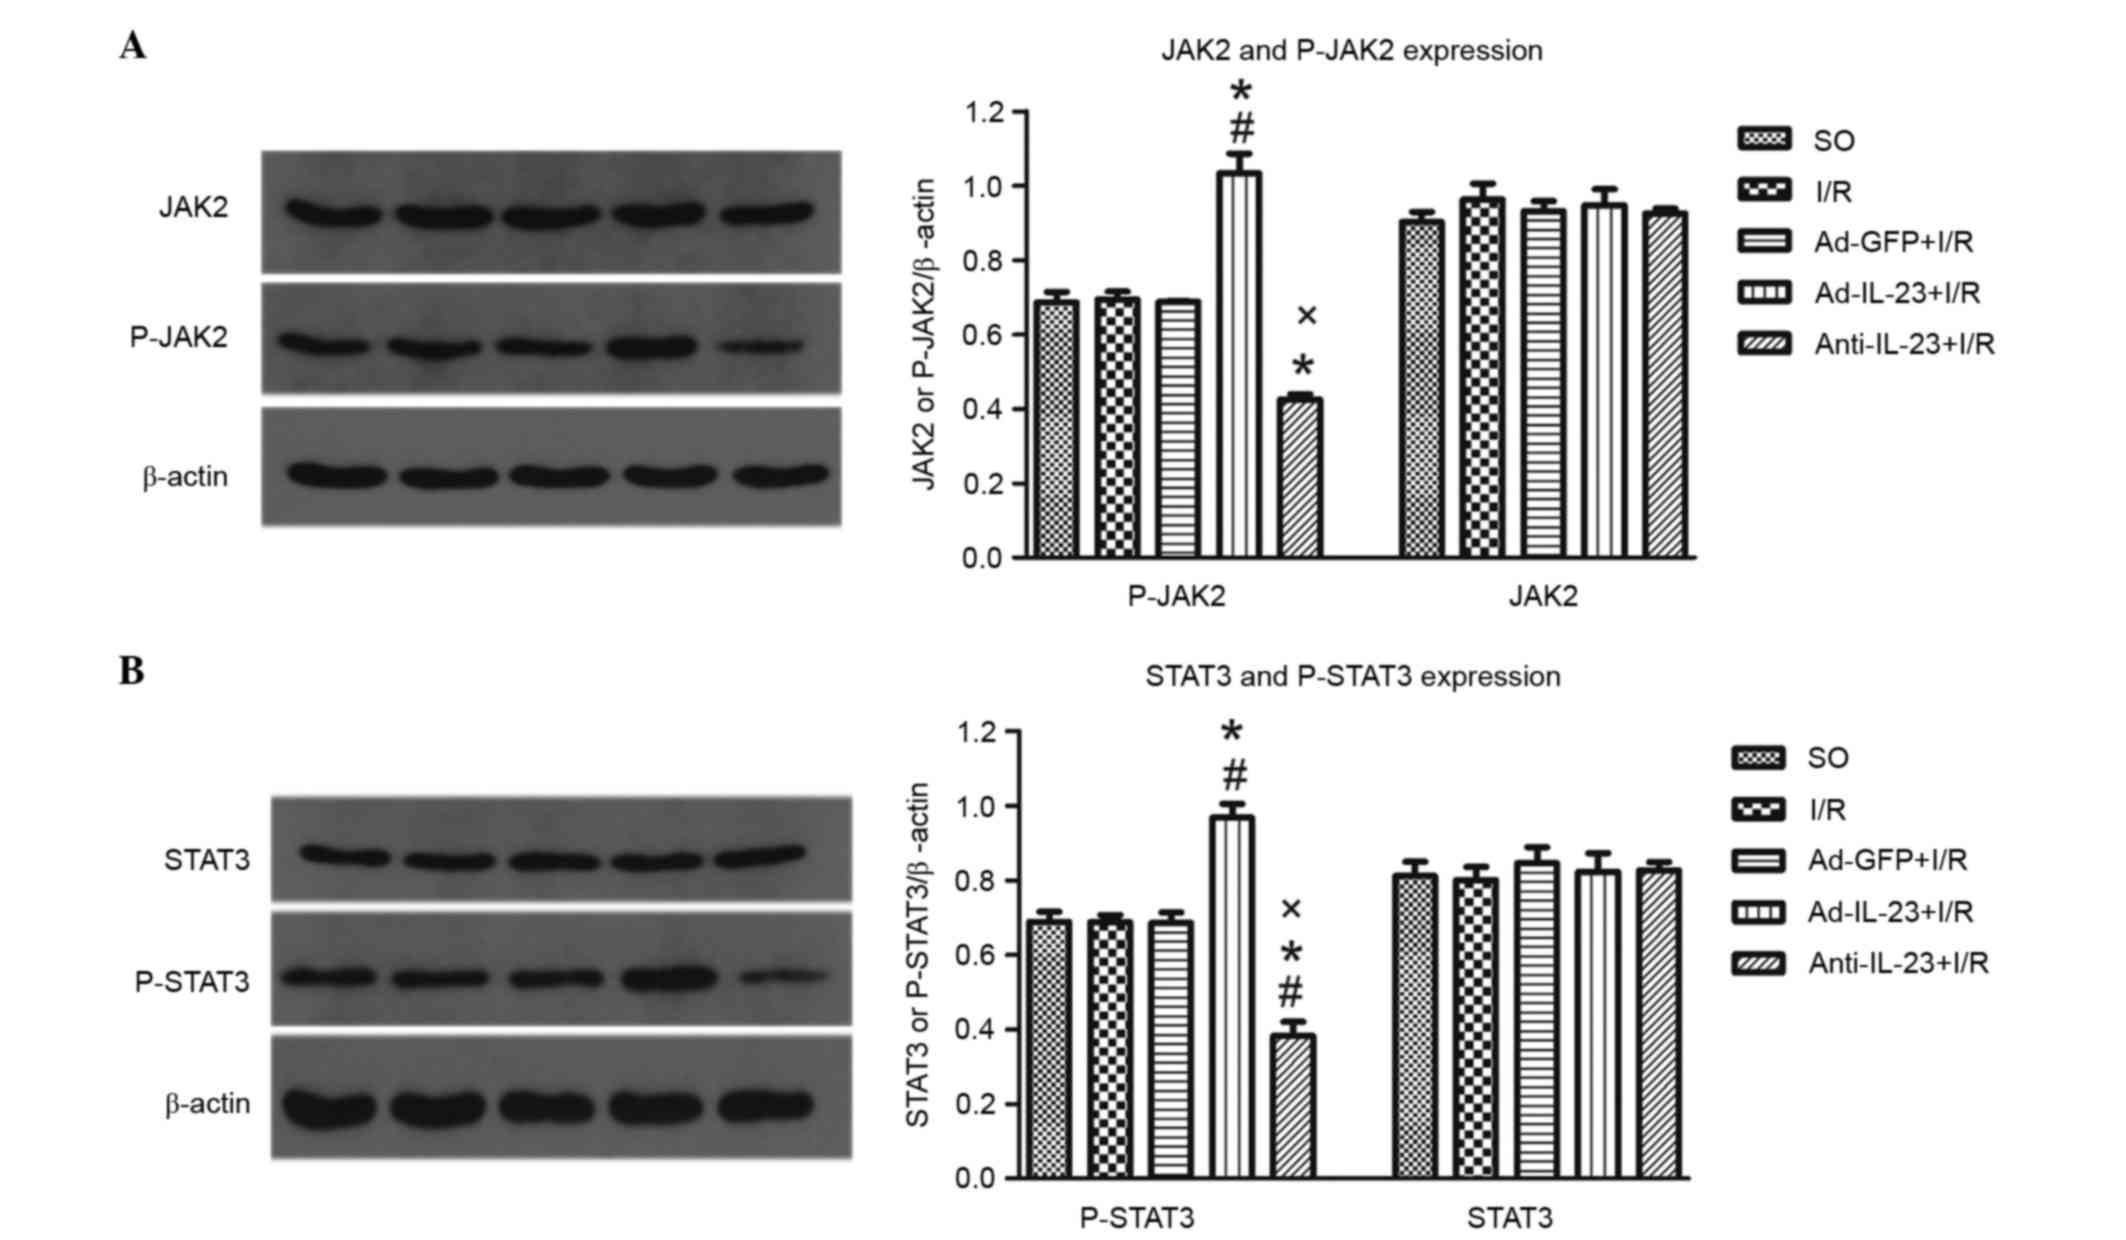 Promoting Effects Of Il 23 On Myocardial Ischemia And Reperfusion Are Associated With Increased Expression Of Il 17a And Upregulation Of The Jak2 Stat3 Signaling Pathway